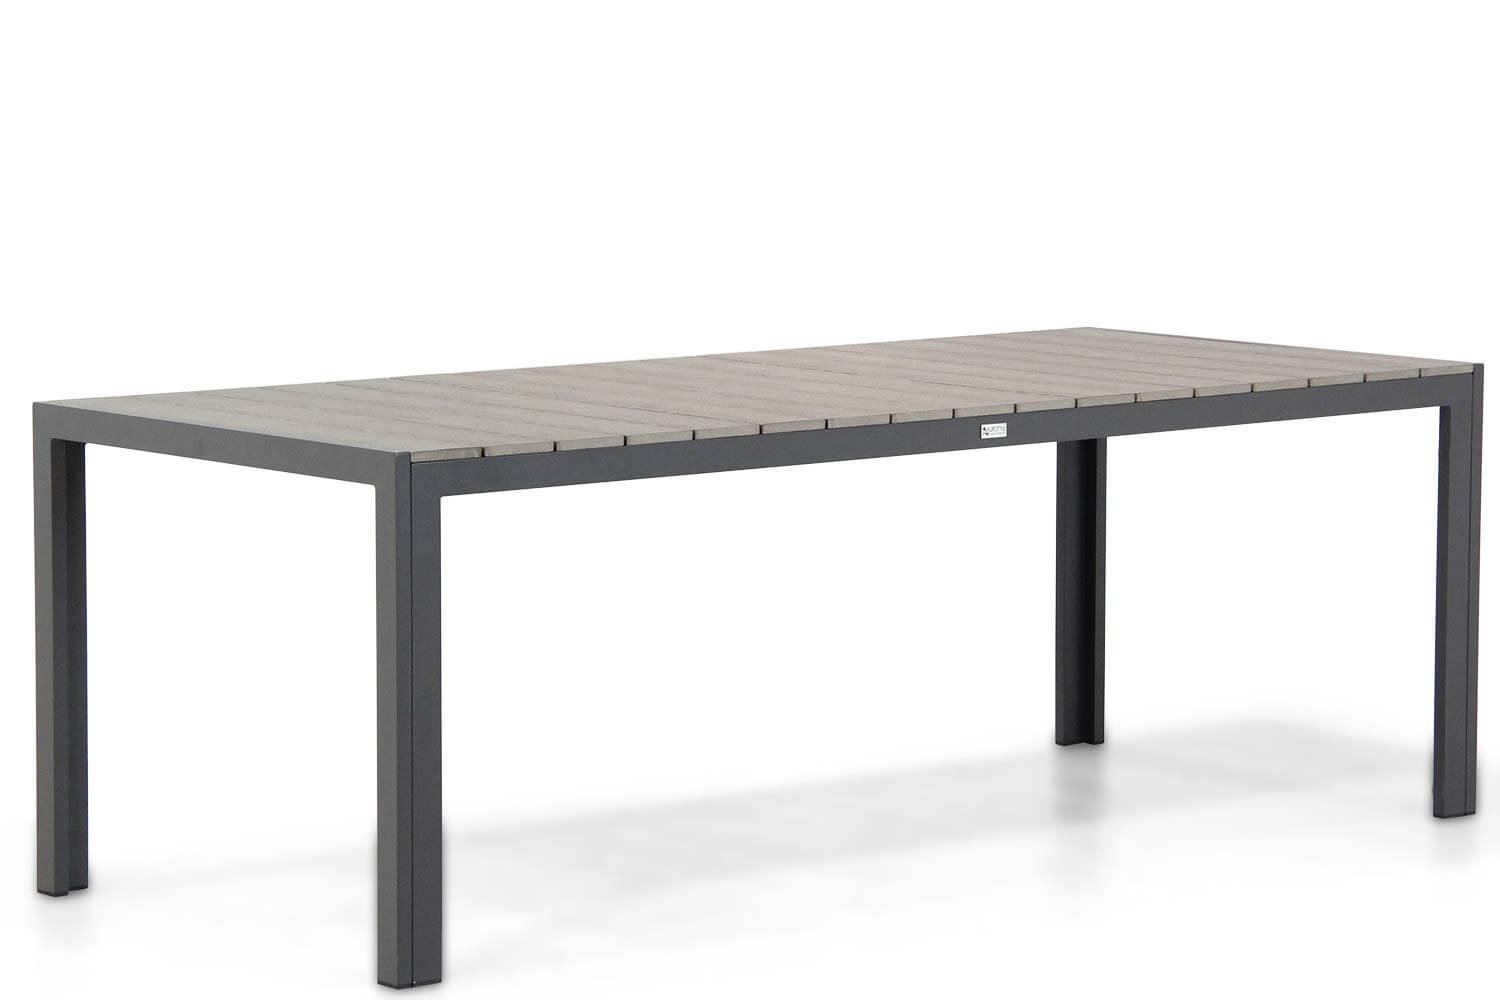 Lifestyle Garden Furniture Young dining tuintafel 217 x 92 cm